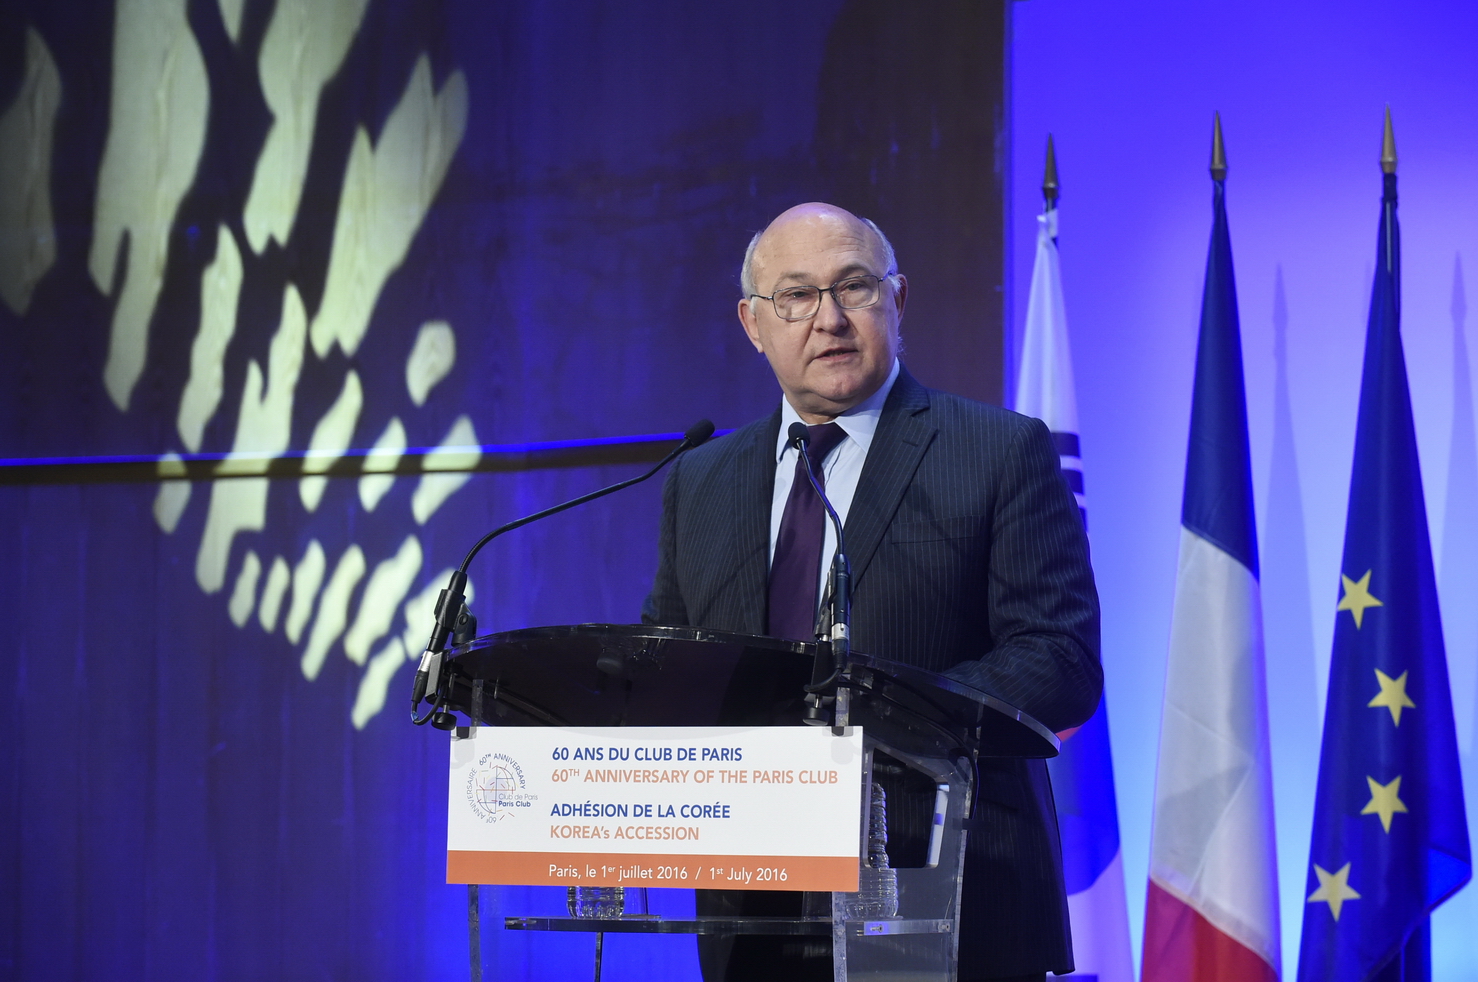 Michel SAPIN, Minister of Finance and Public Accounts, France